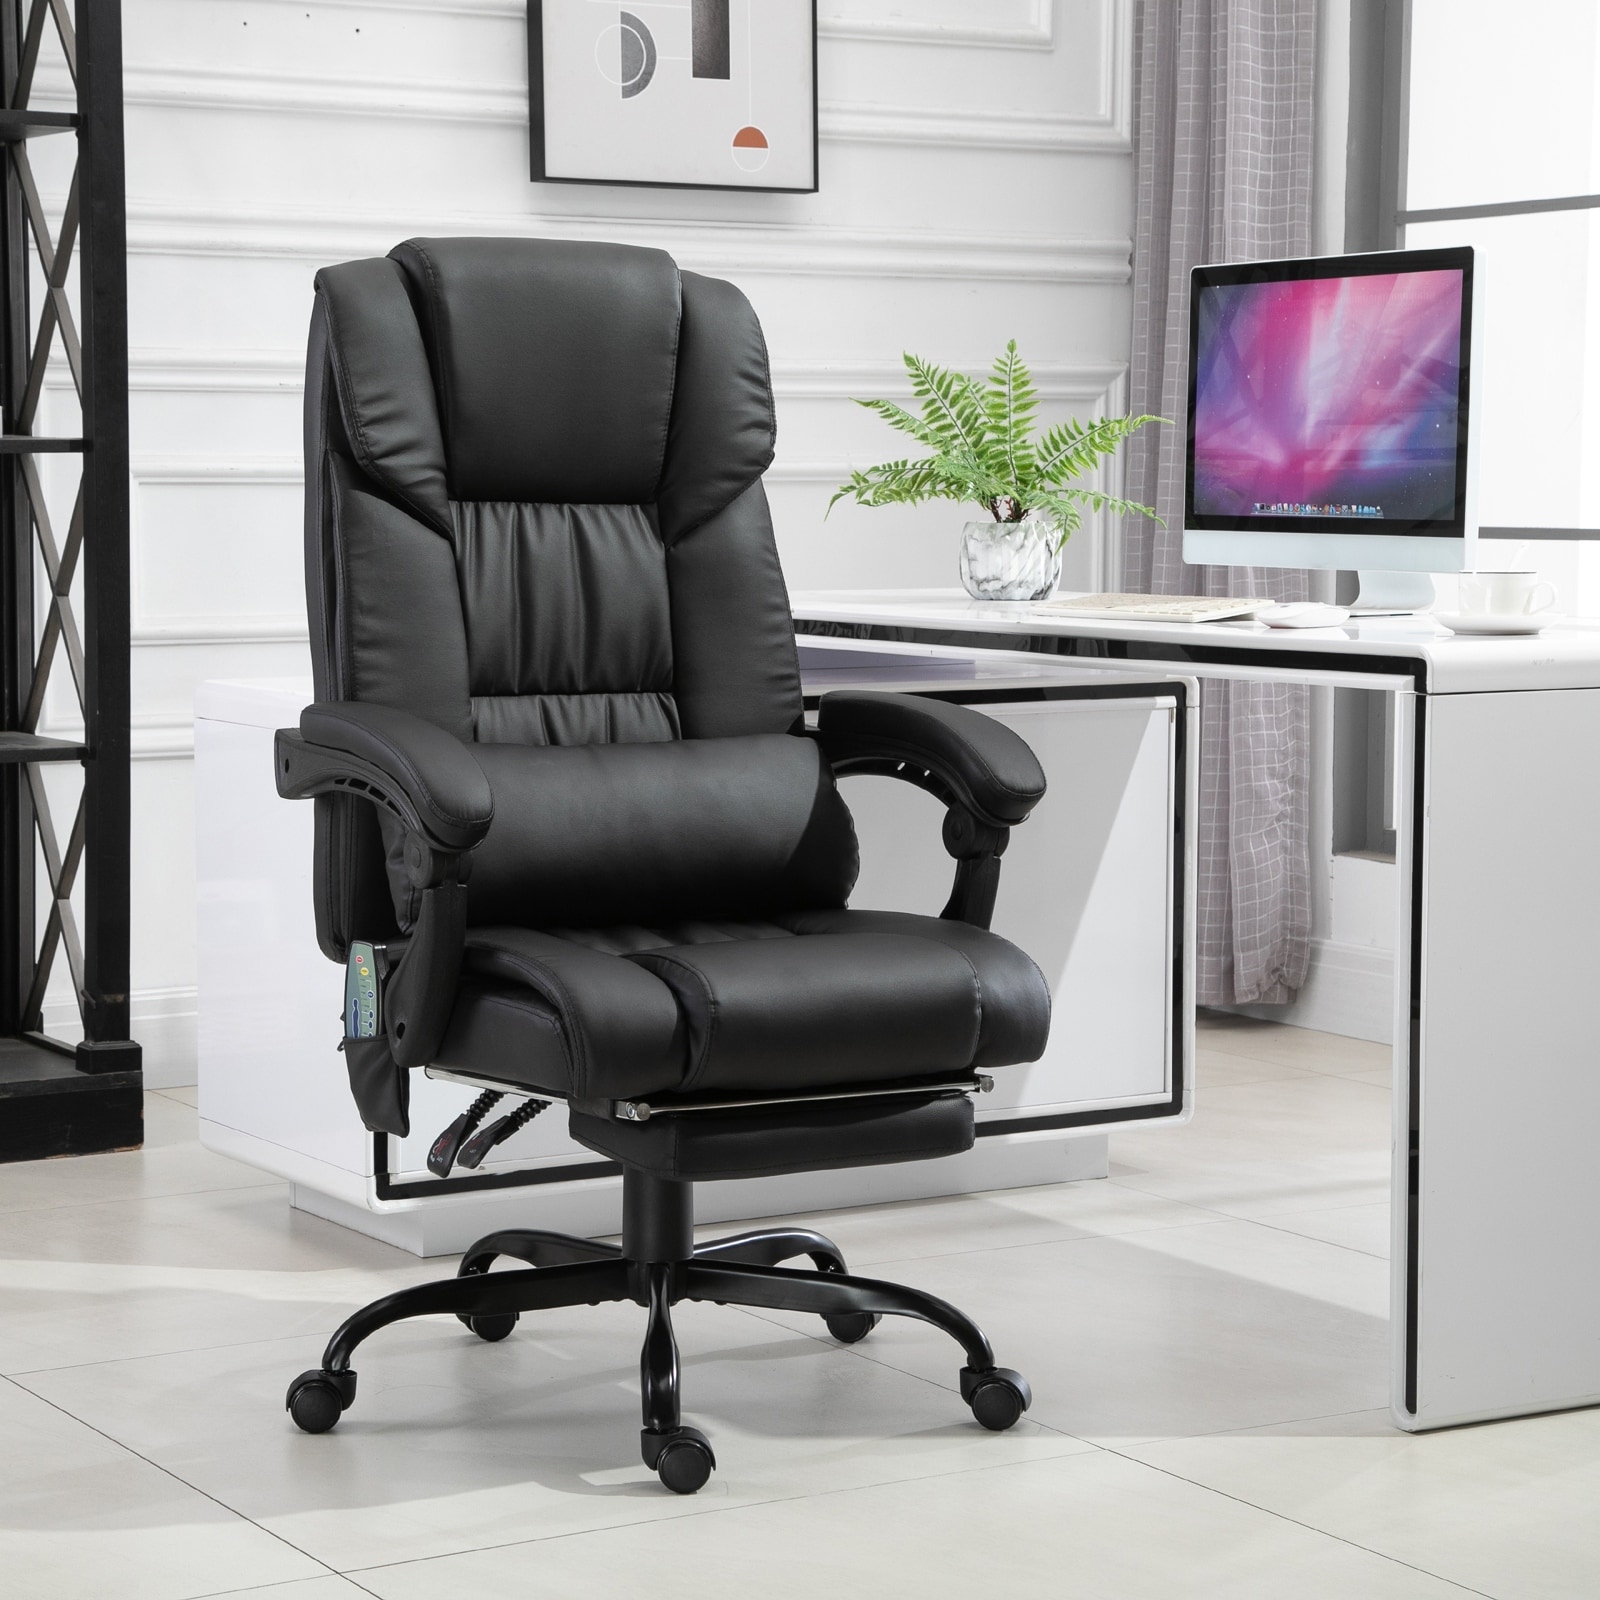 https://ak1.ostkcdn.com/images/products/is/images/direct/d12c501300ab4b880cfa52f9bdaee02f65f65861/Vinsetto-Office-Desk-Chair-Recliner%2C-Height-Adjustable-Movable-Lumbar-Support-with-6-Point-Vibrating-Massage.jpg